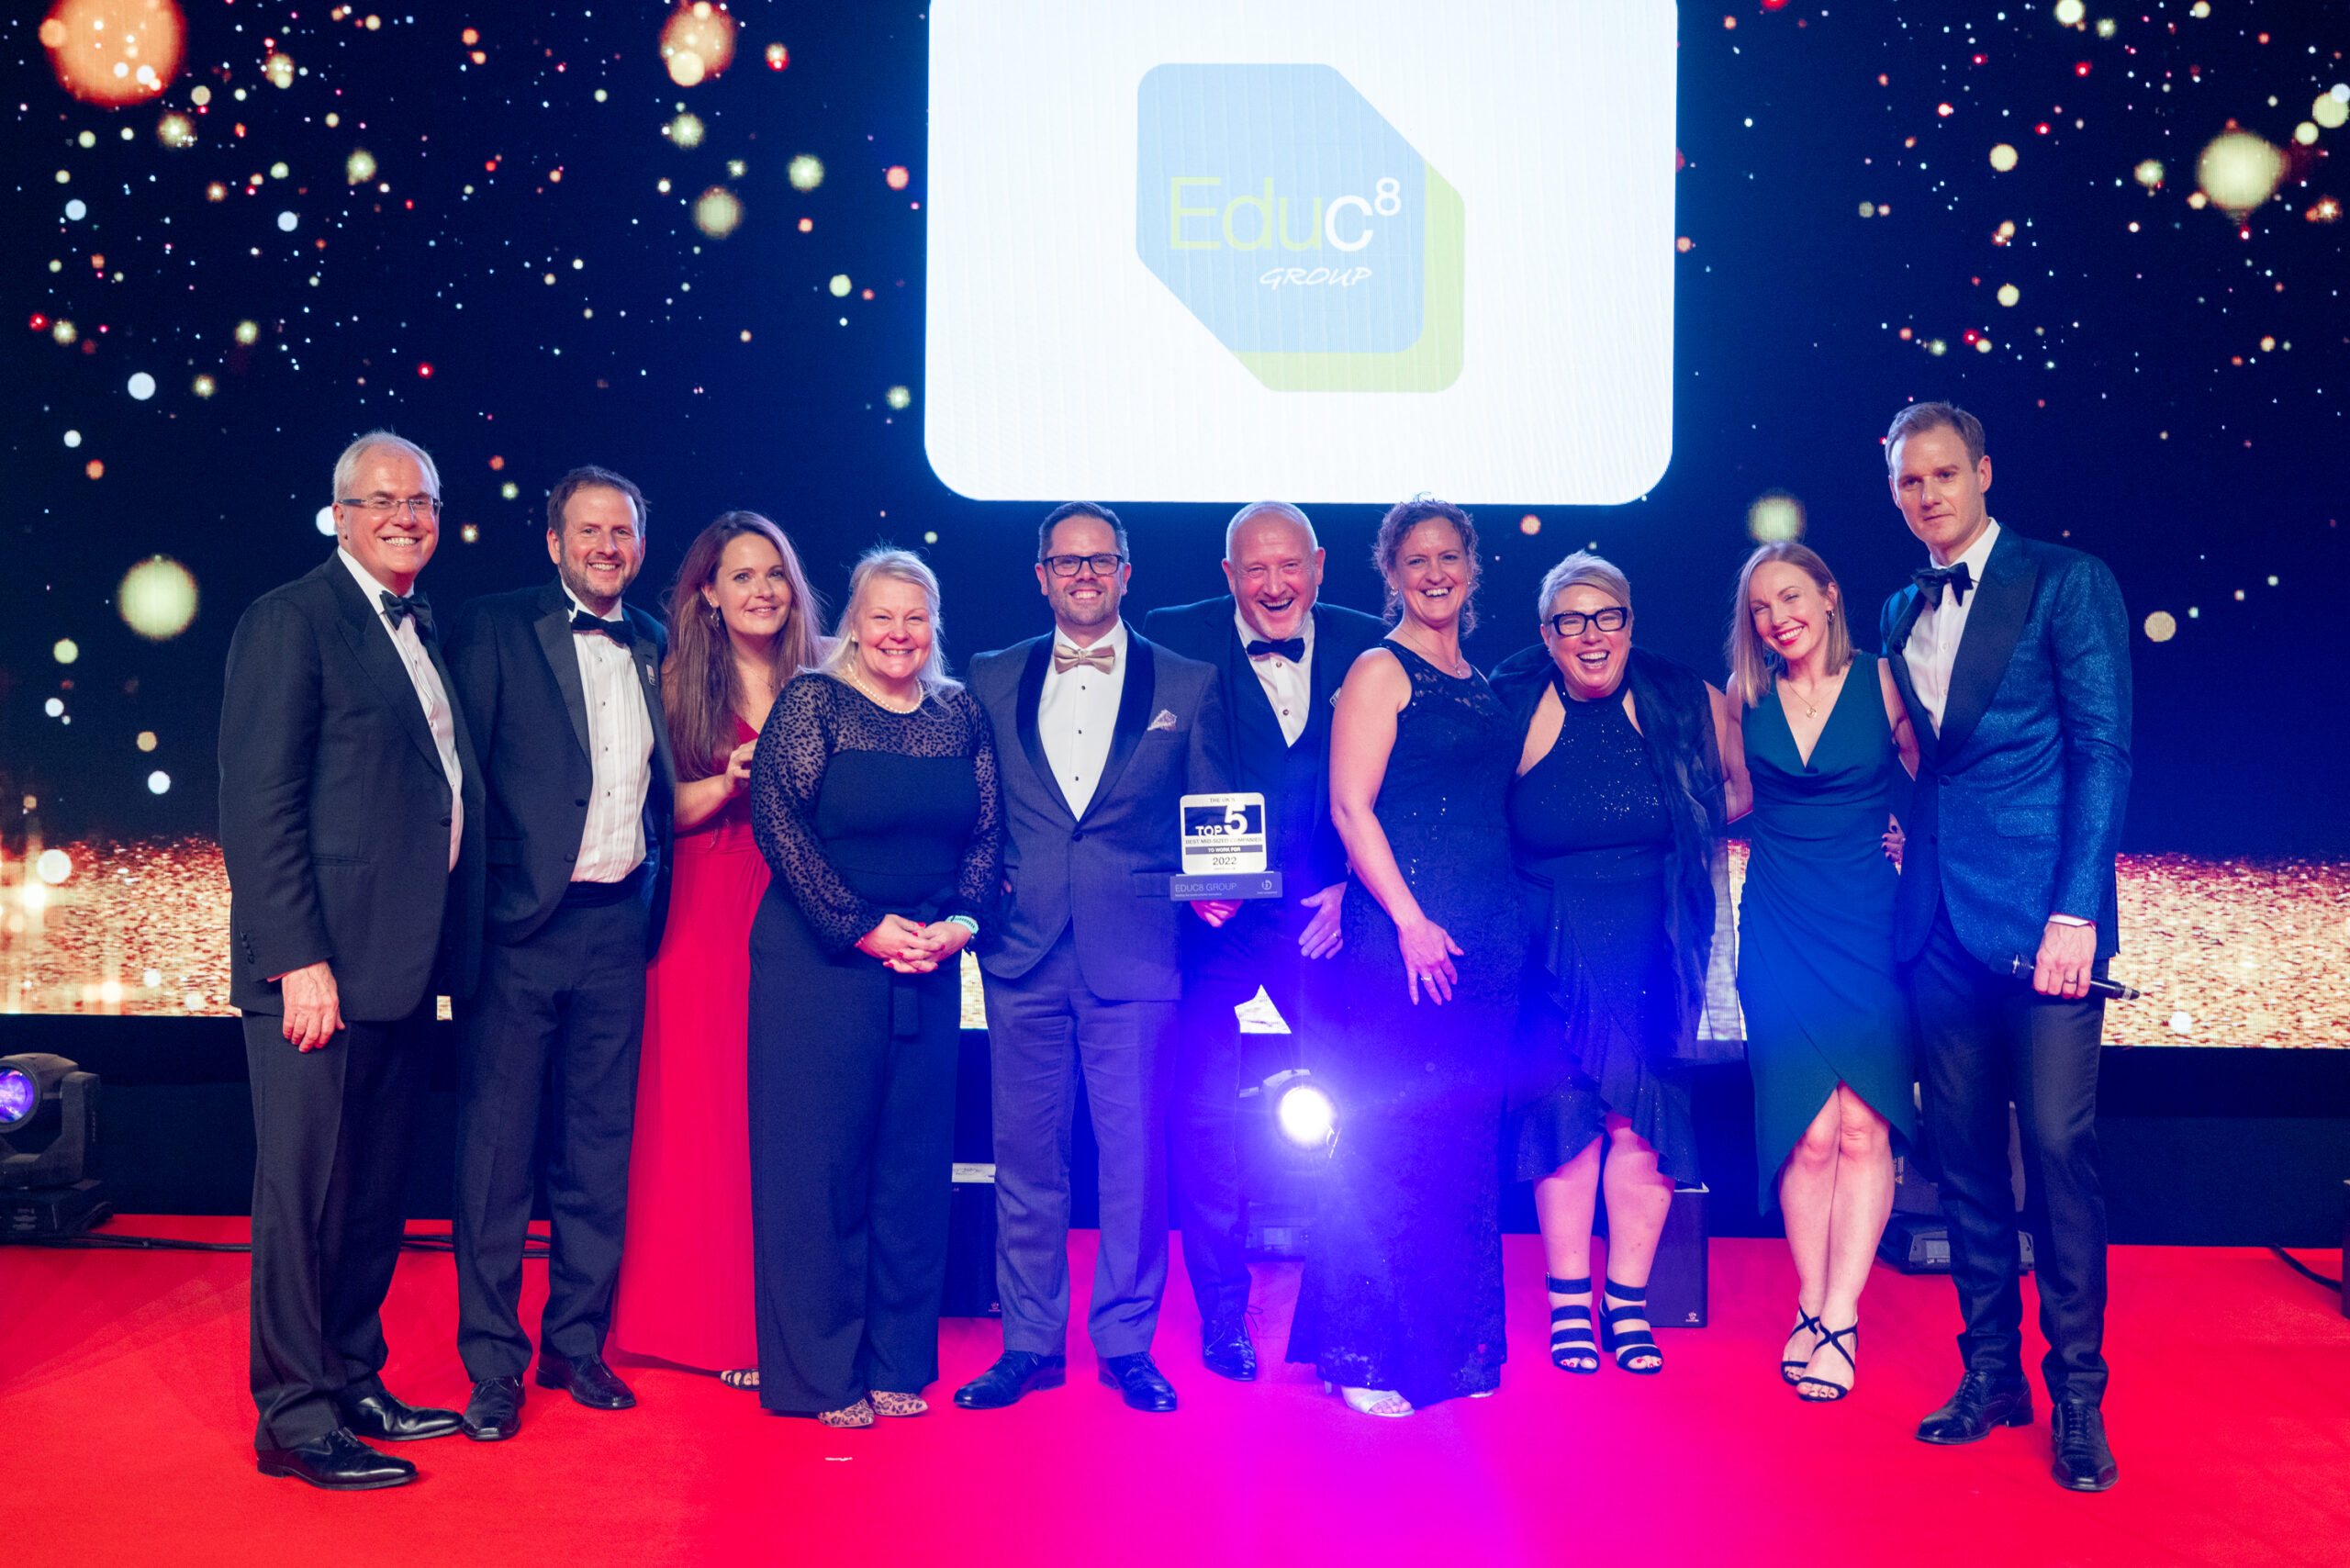 Educ8 Training Group leads sector as Best Company to work for in UK